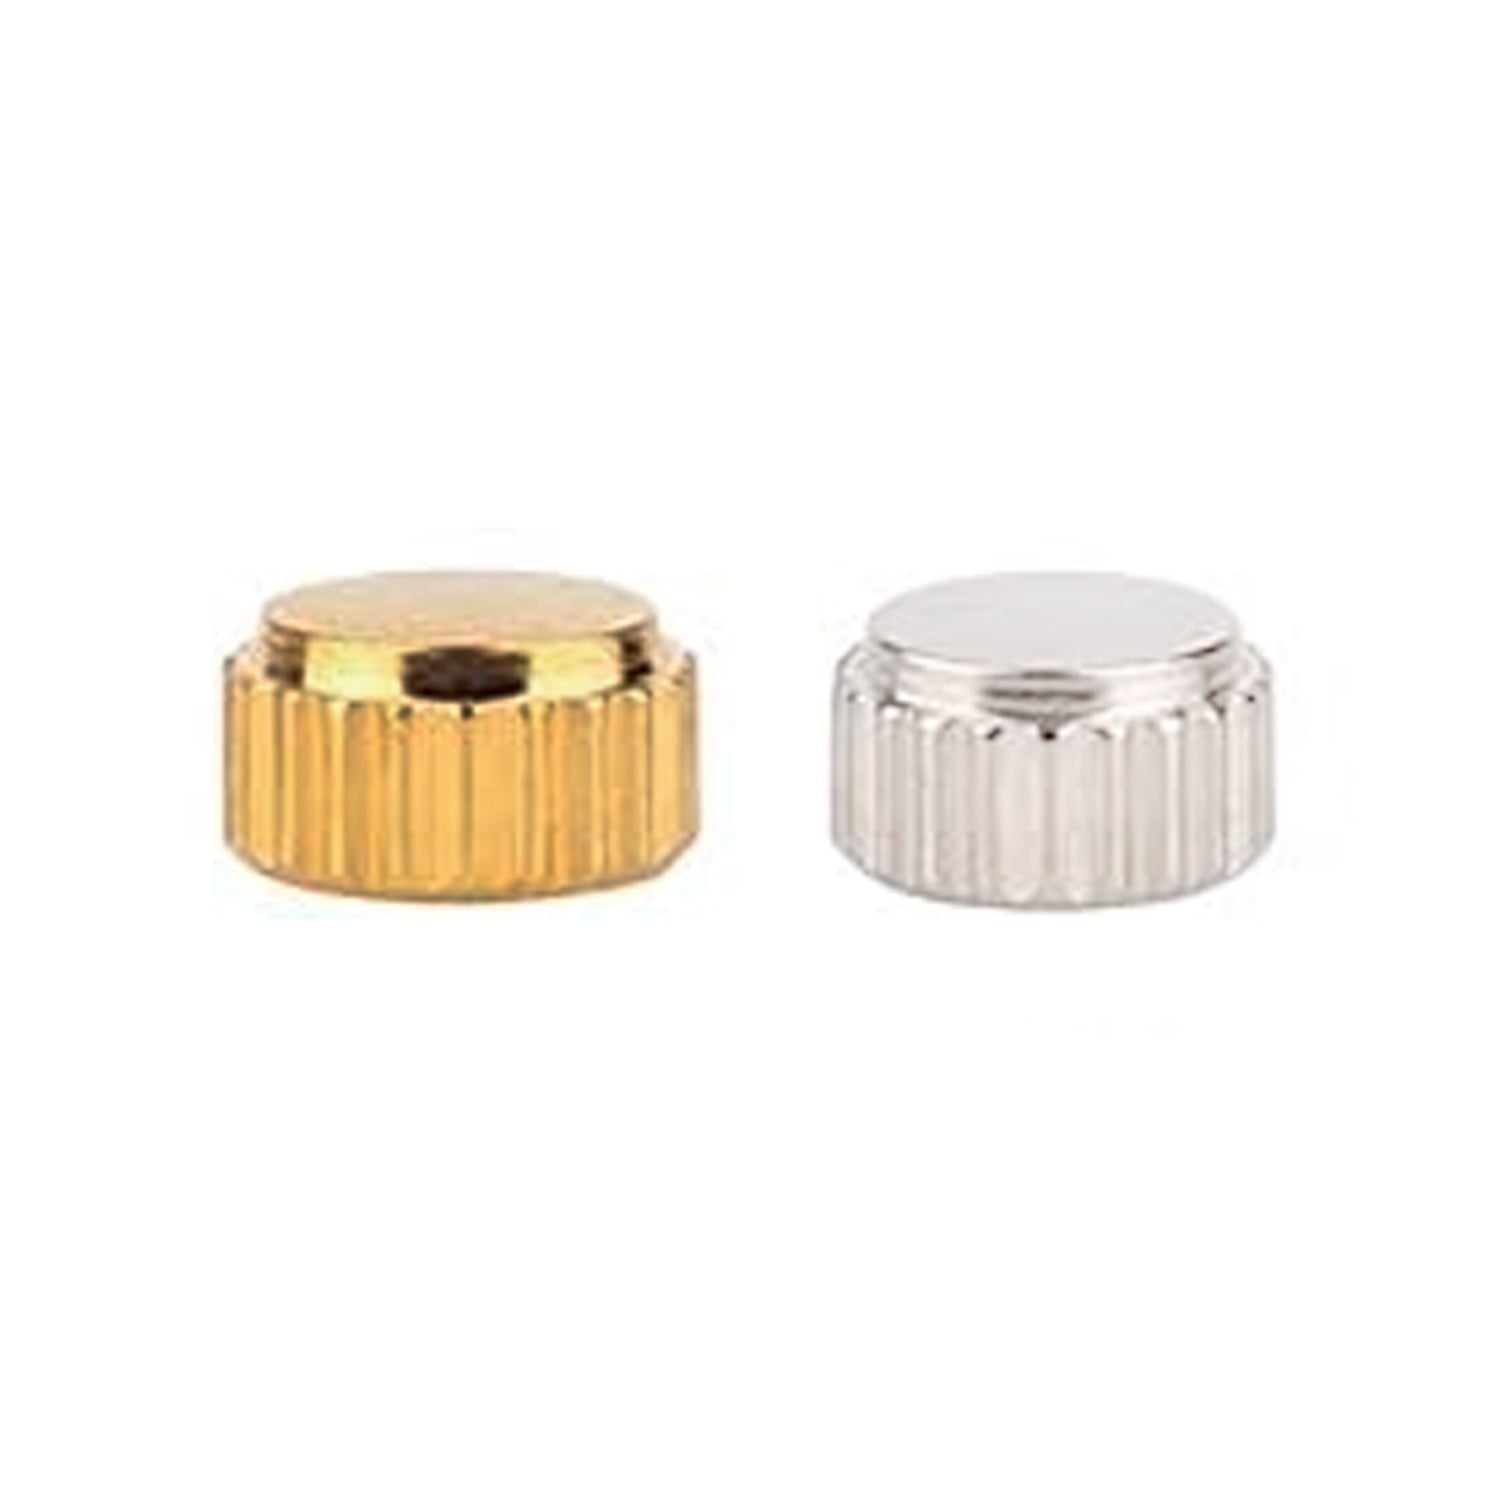 Economy Waterproof Crowns in White and Yellow Gold (3.0mm - 4.5mm) Tap 10